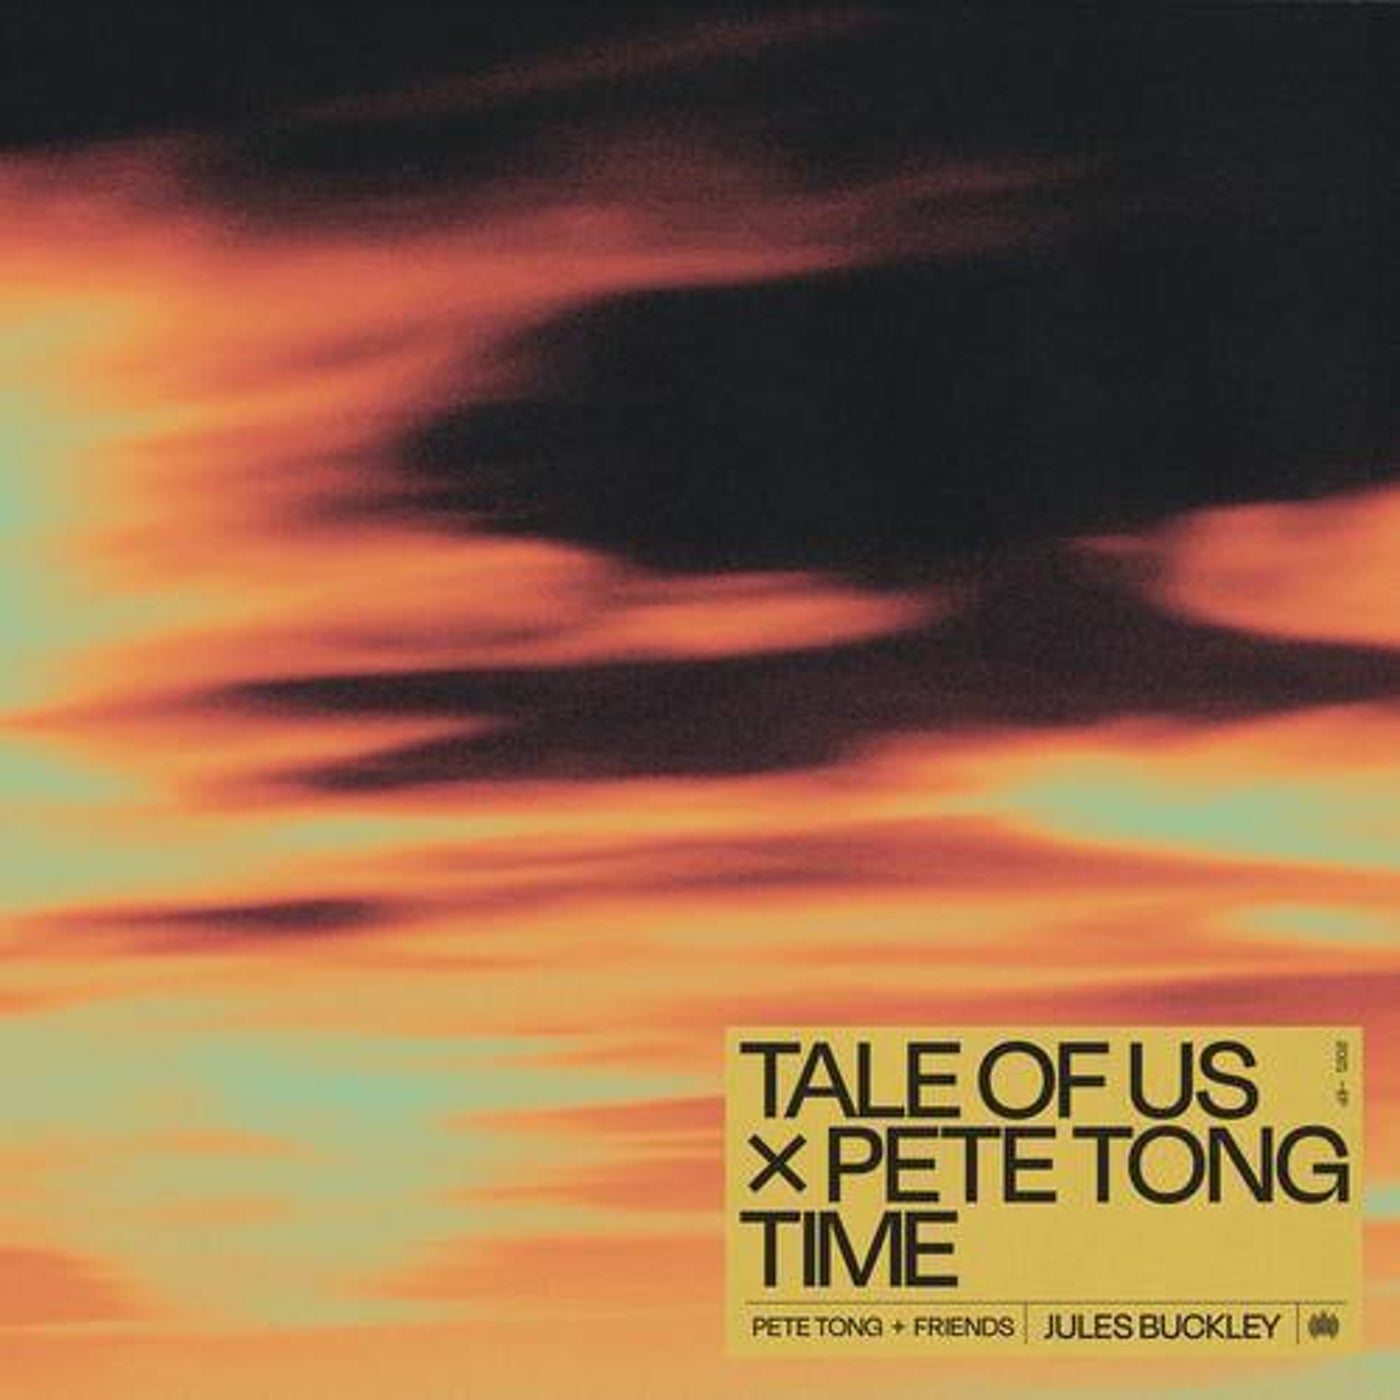 Download Pete Tong, Tale Of Us - Time feat. Jules Buckley on Electrobuzz